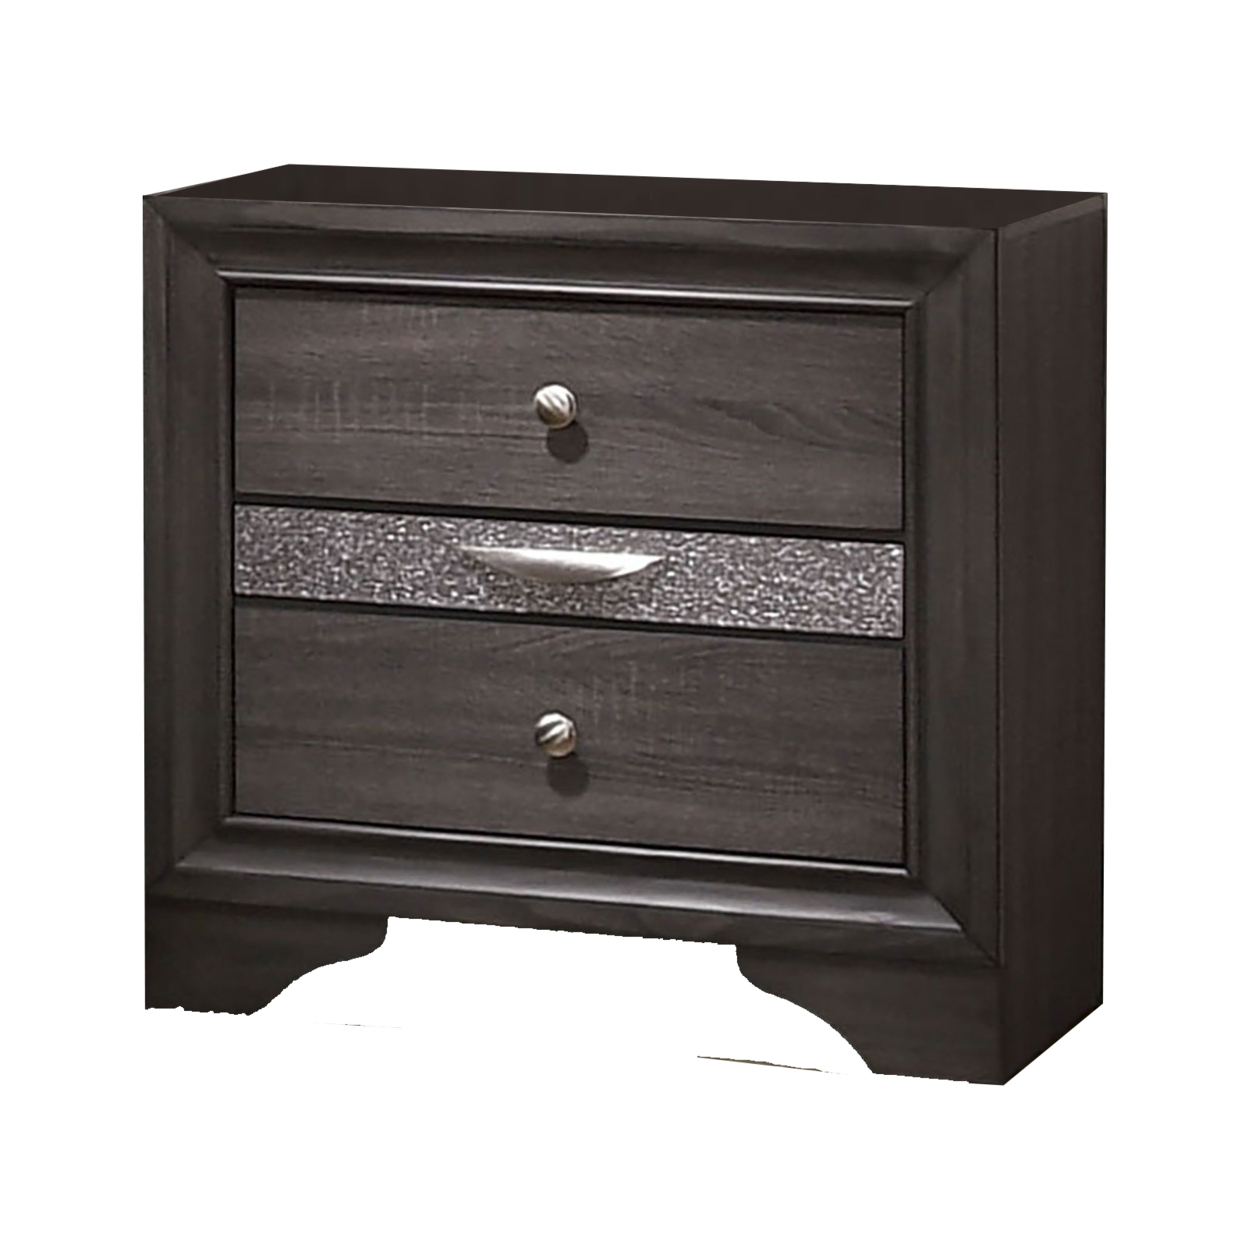 Wooden Nightstand With 2 Drawers And 1 Jewelry Drawer, Gray And Silver- Saltoro Sherpi